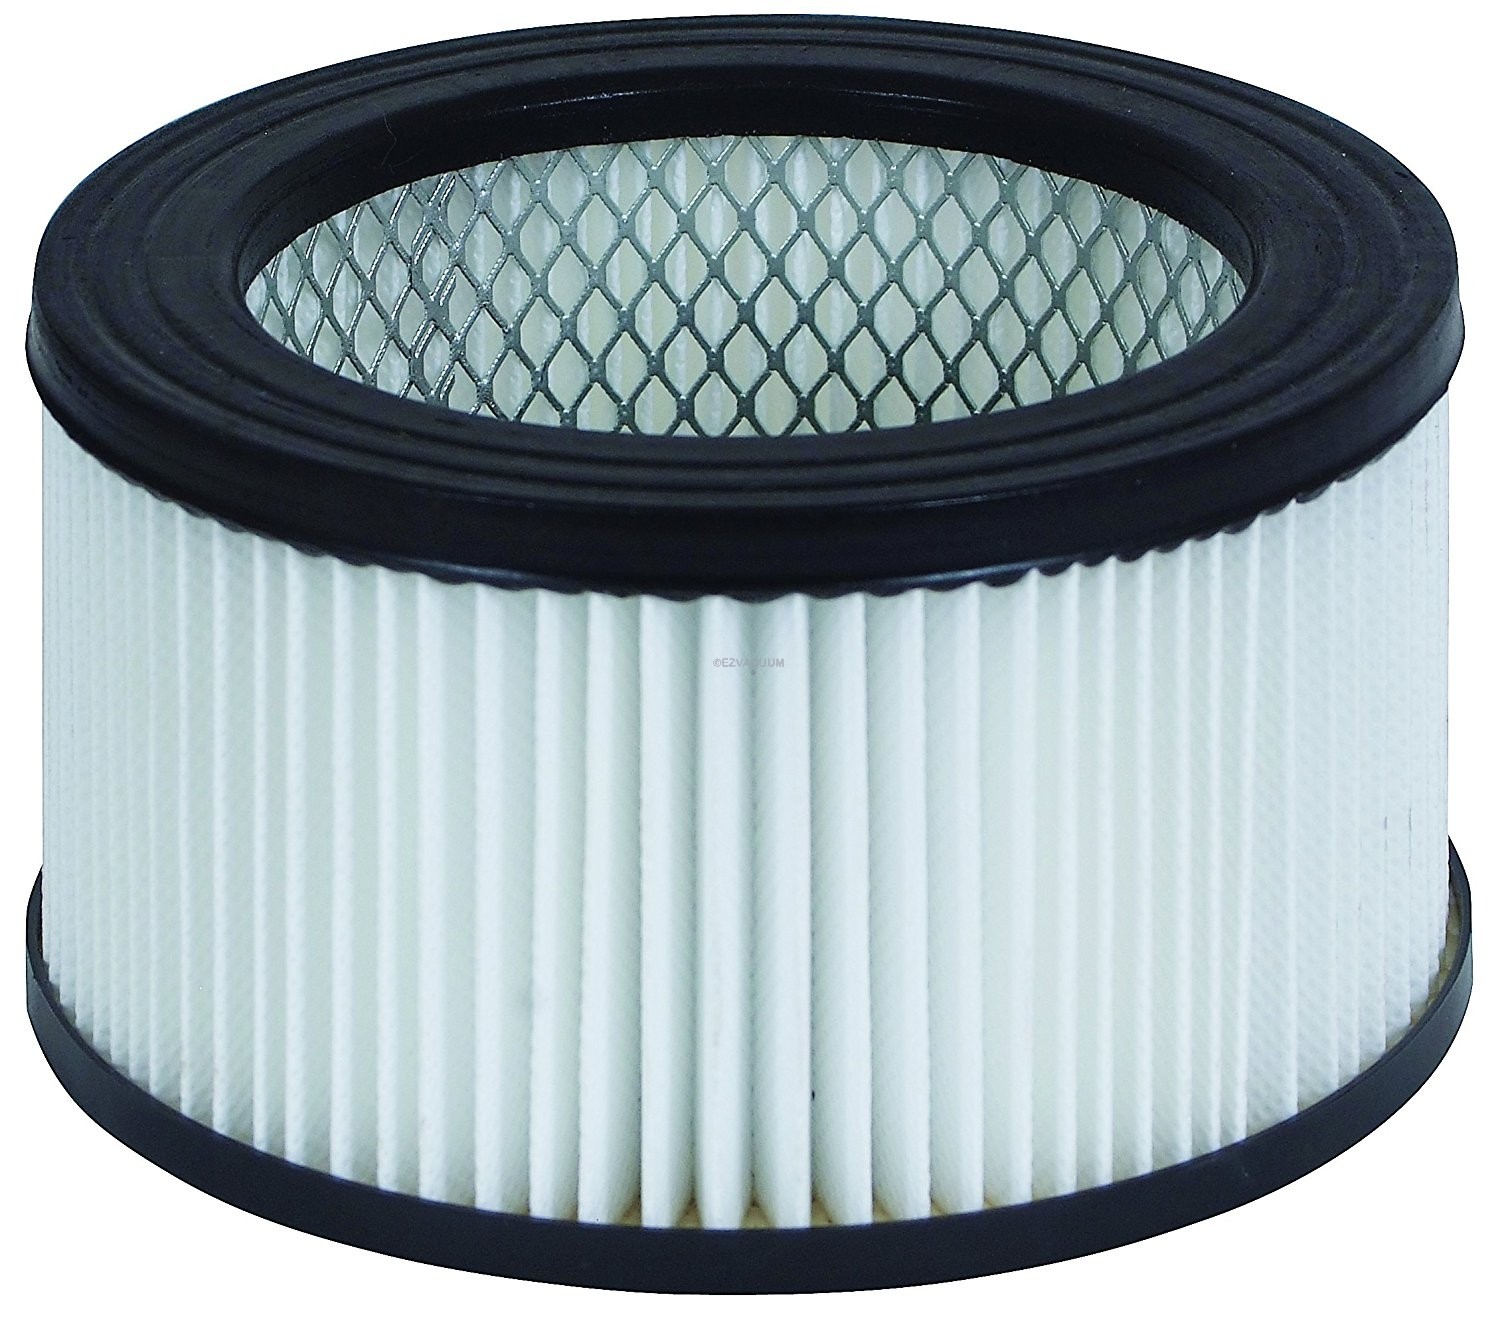 A1209 Replacement Details about   Outer Filter for Love-Less Ash A1200 Lynx Ash Vac Vacuum 